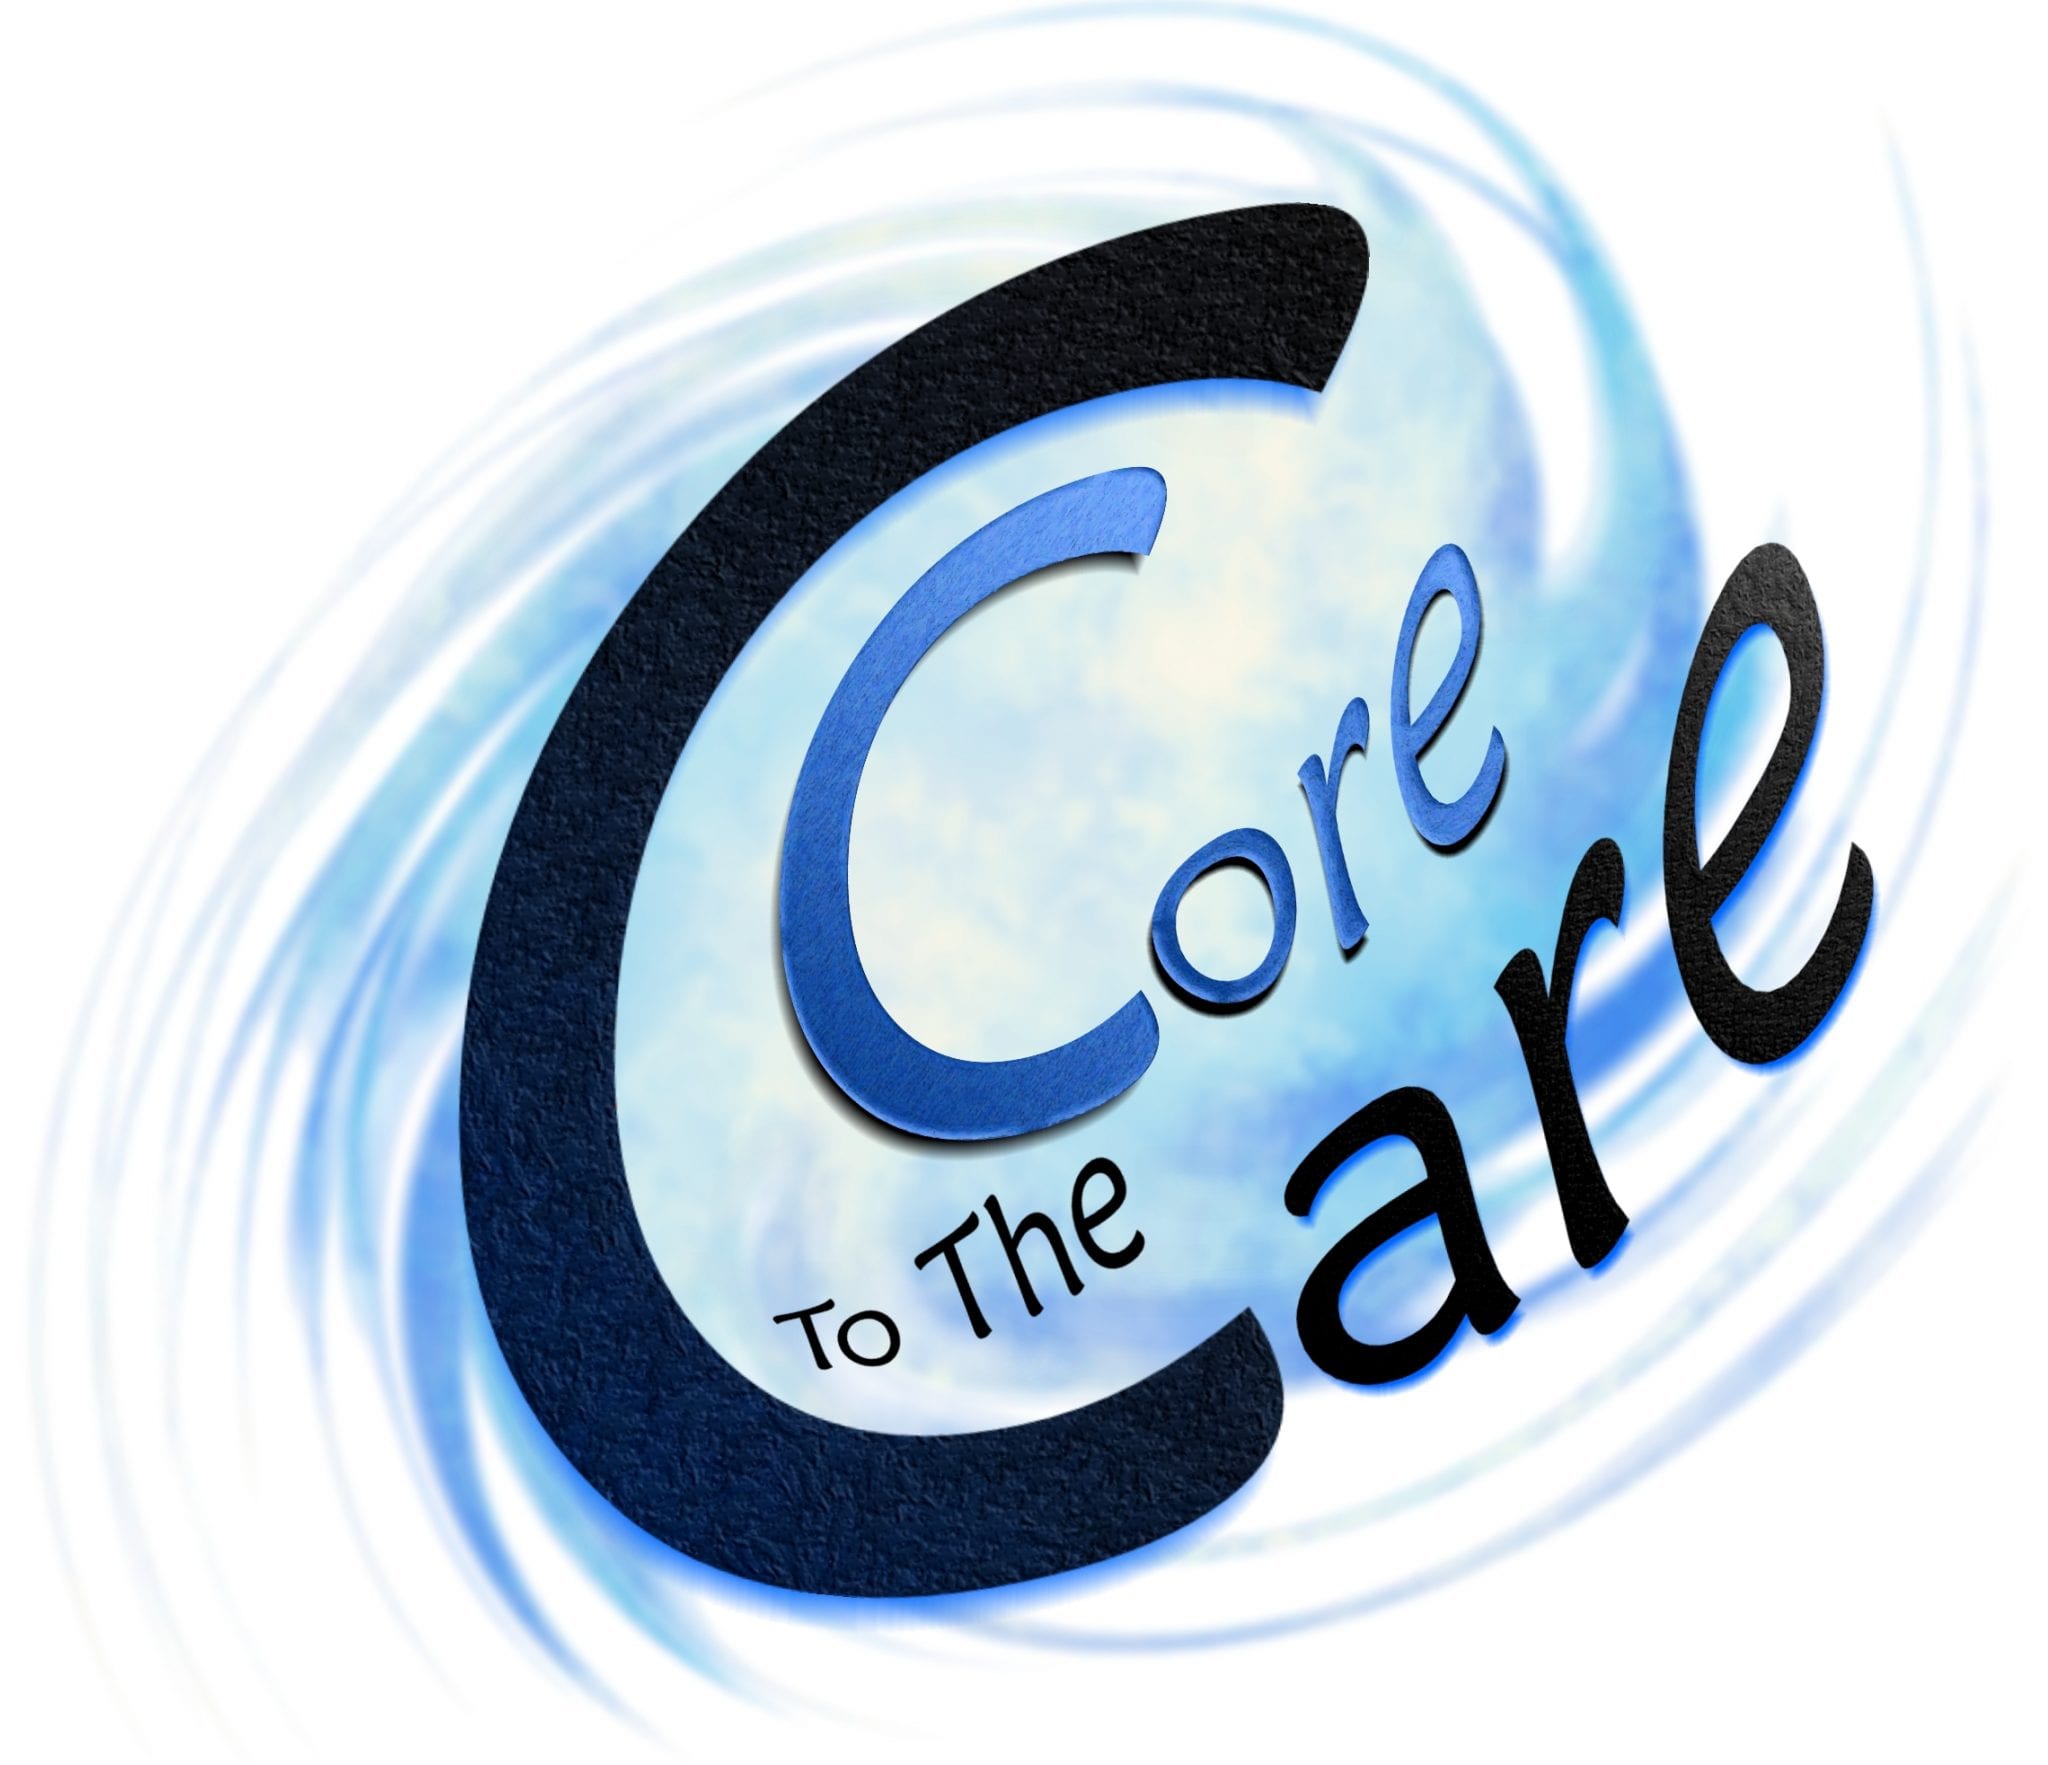 April 23 Is “Care to the Core Day”